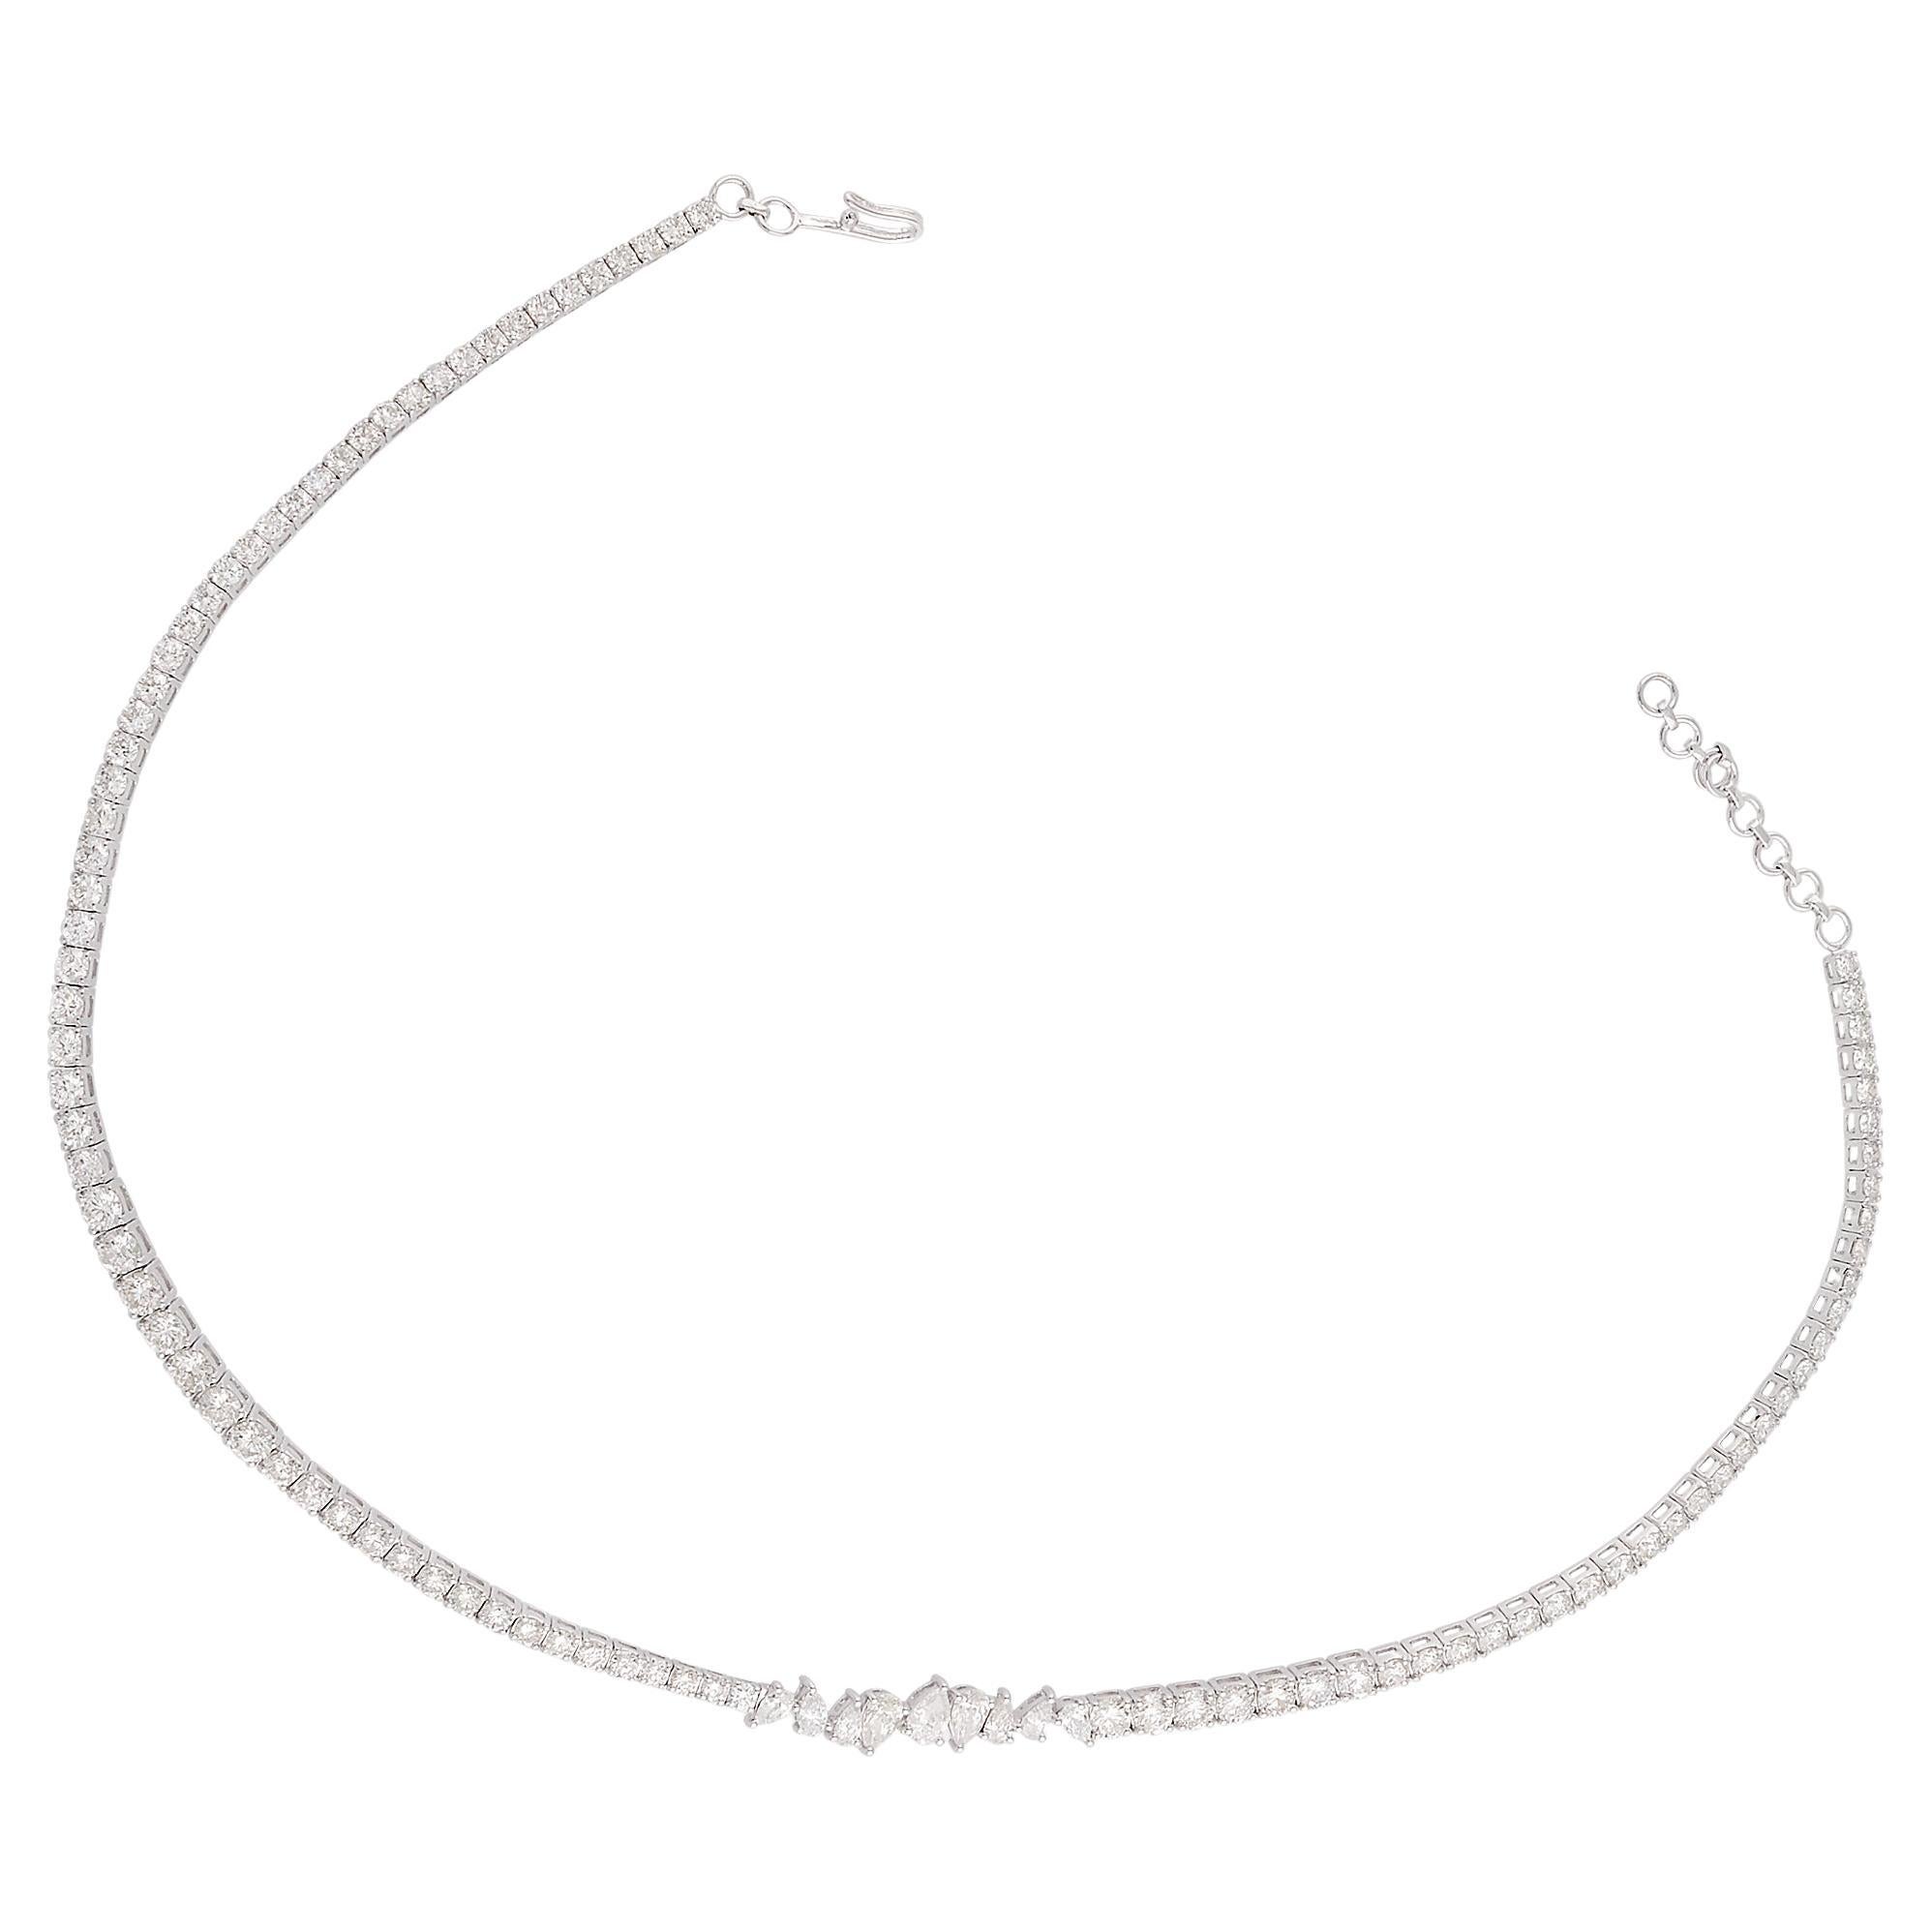 8.7 Carat SI Clarity HI Color Pear Round Diamond Choker Necklace 14k White Gold